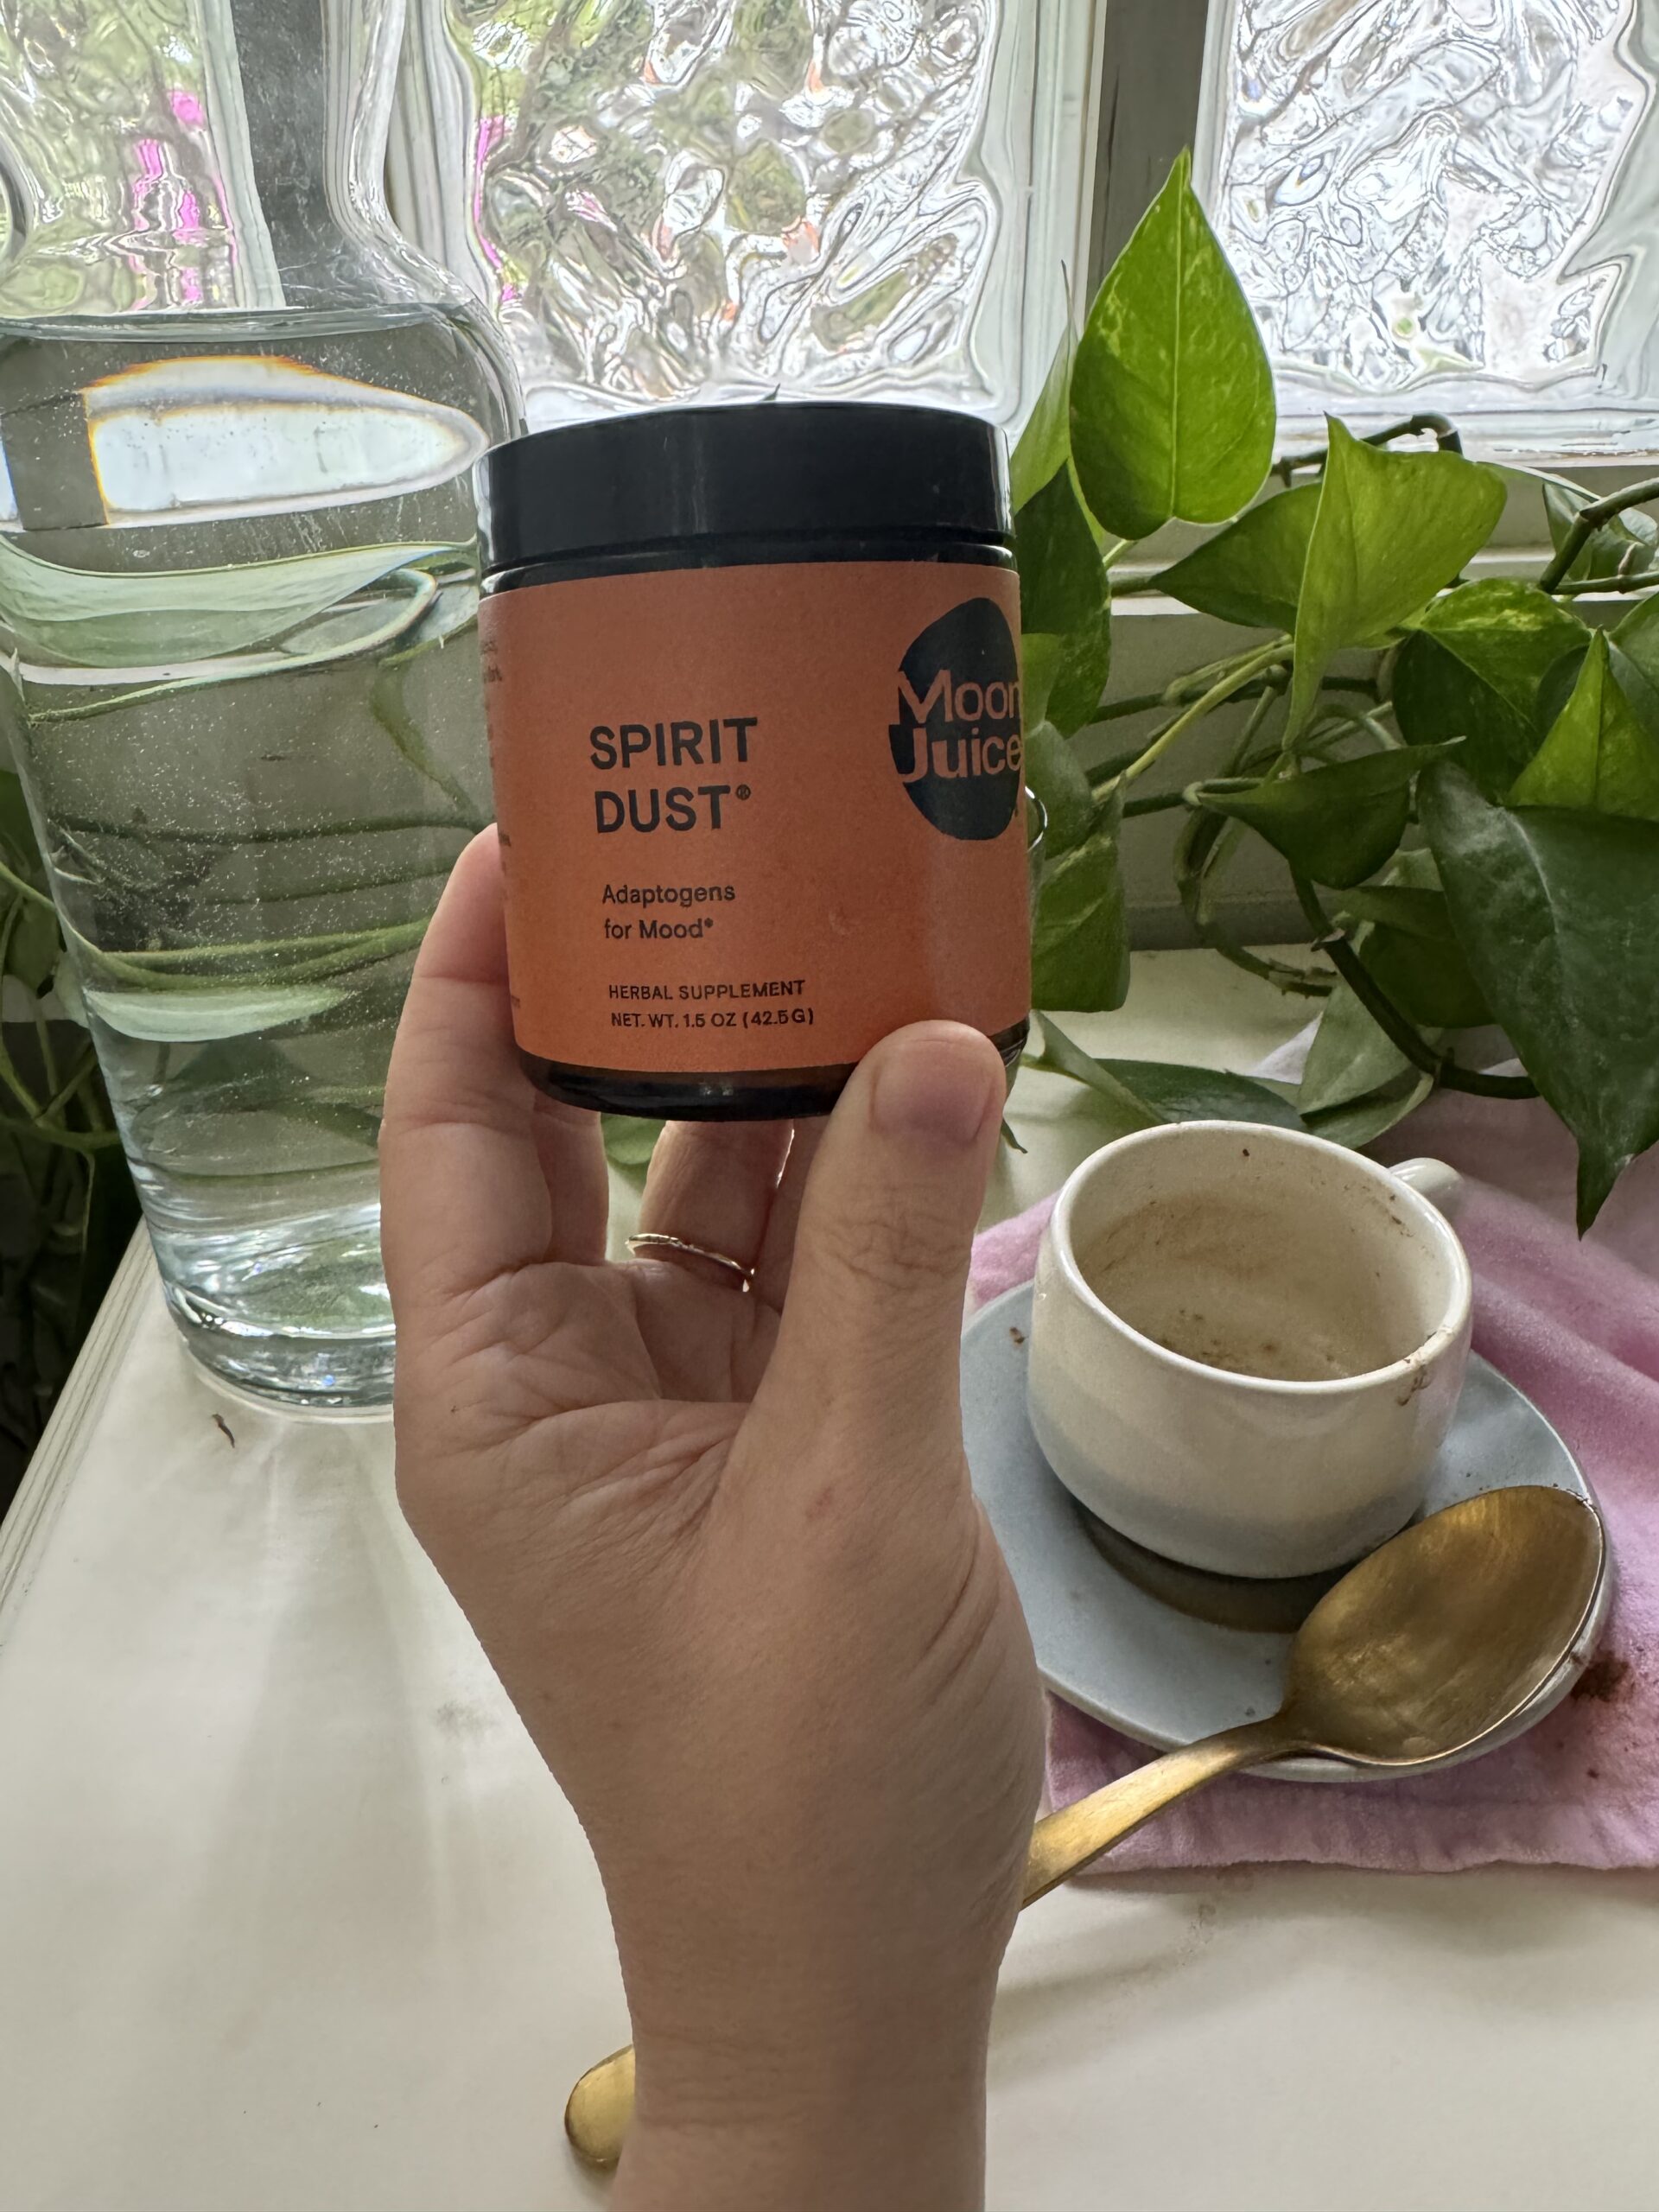 A hand holding a container of moon juice spirit dust supplement next to a cup of beverage and green plants by a window.